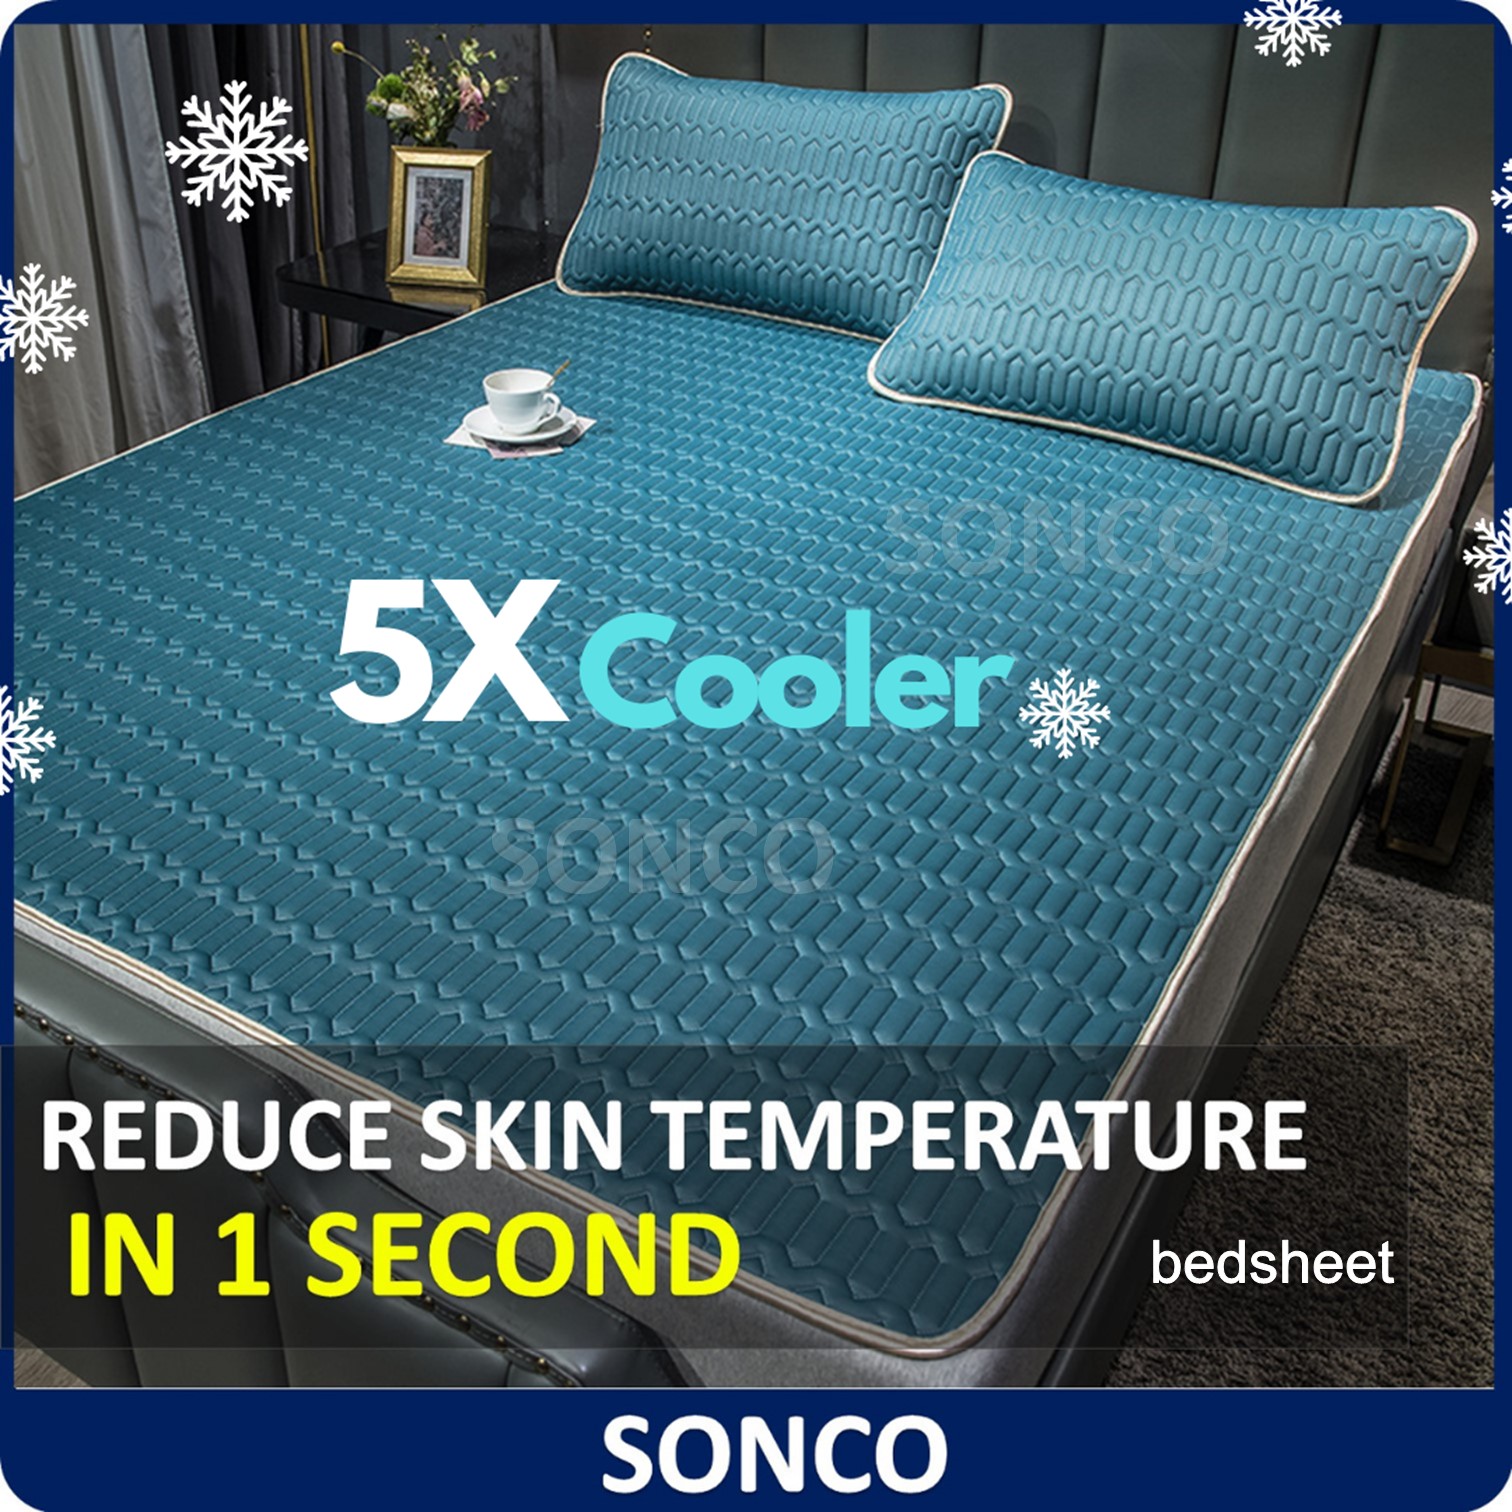 Nano Cool Mattress Cool Cushion [Free Pillow Cover] Cooling Bed Sheet Tencel ice Silk Mattress Zhimeng Man Mattress Polycool pad Thailand and latex Bed mat Nano Cool Cadar Sheet&Pillow Cover Soft Cool Touch Bedding Set Queen Bed Sheets Polycool pad